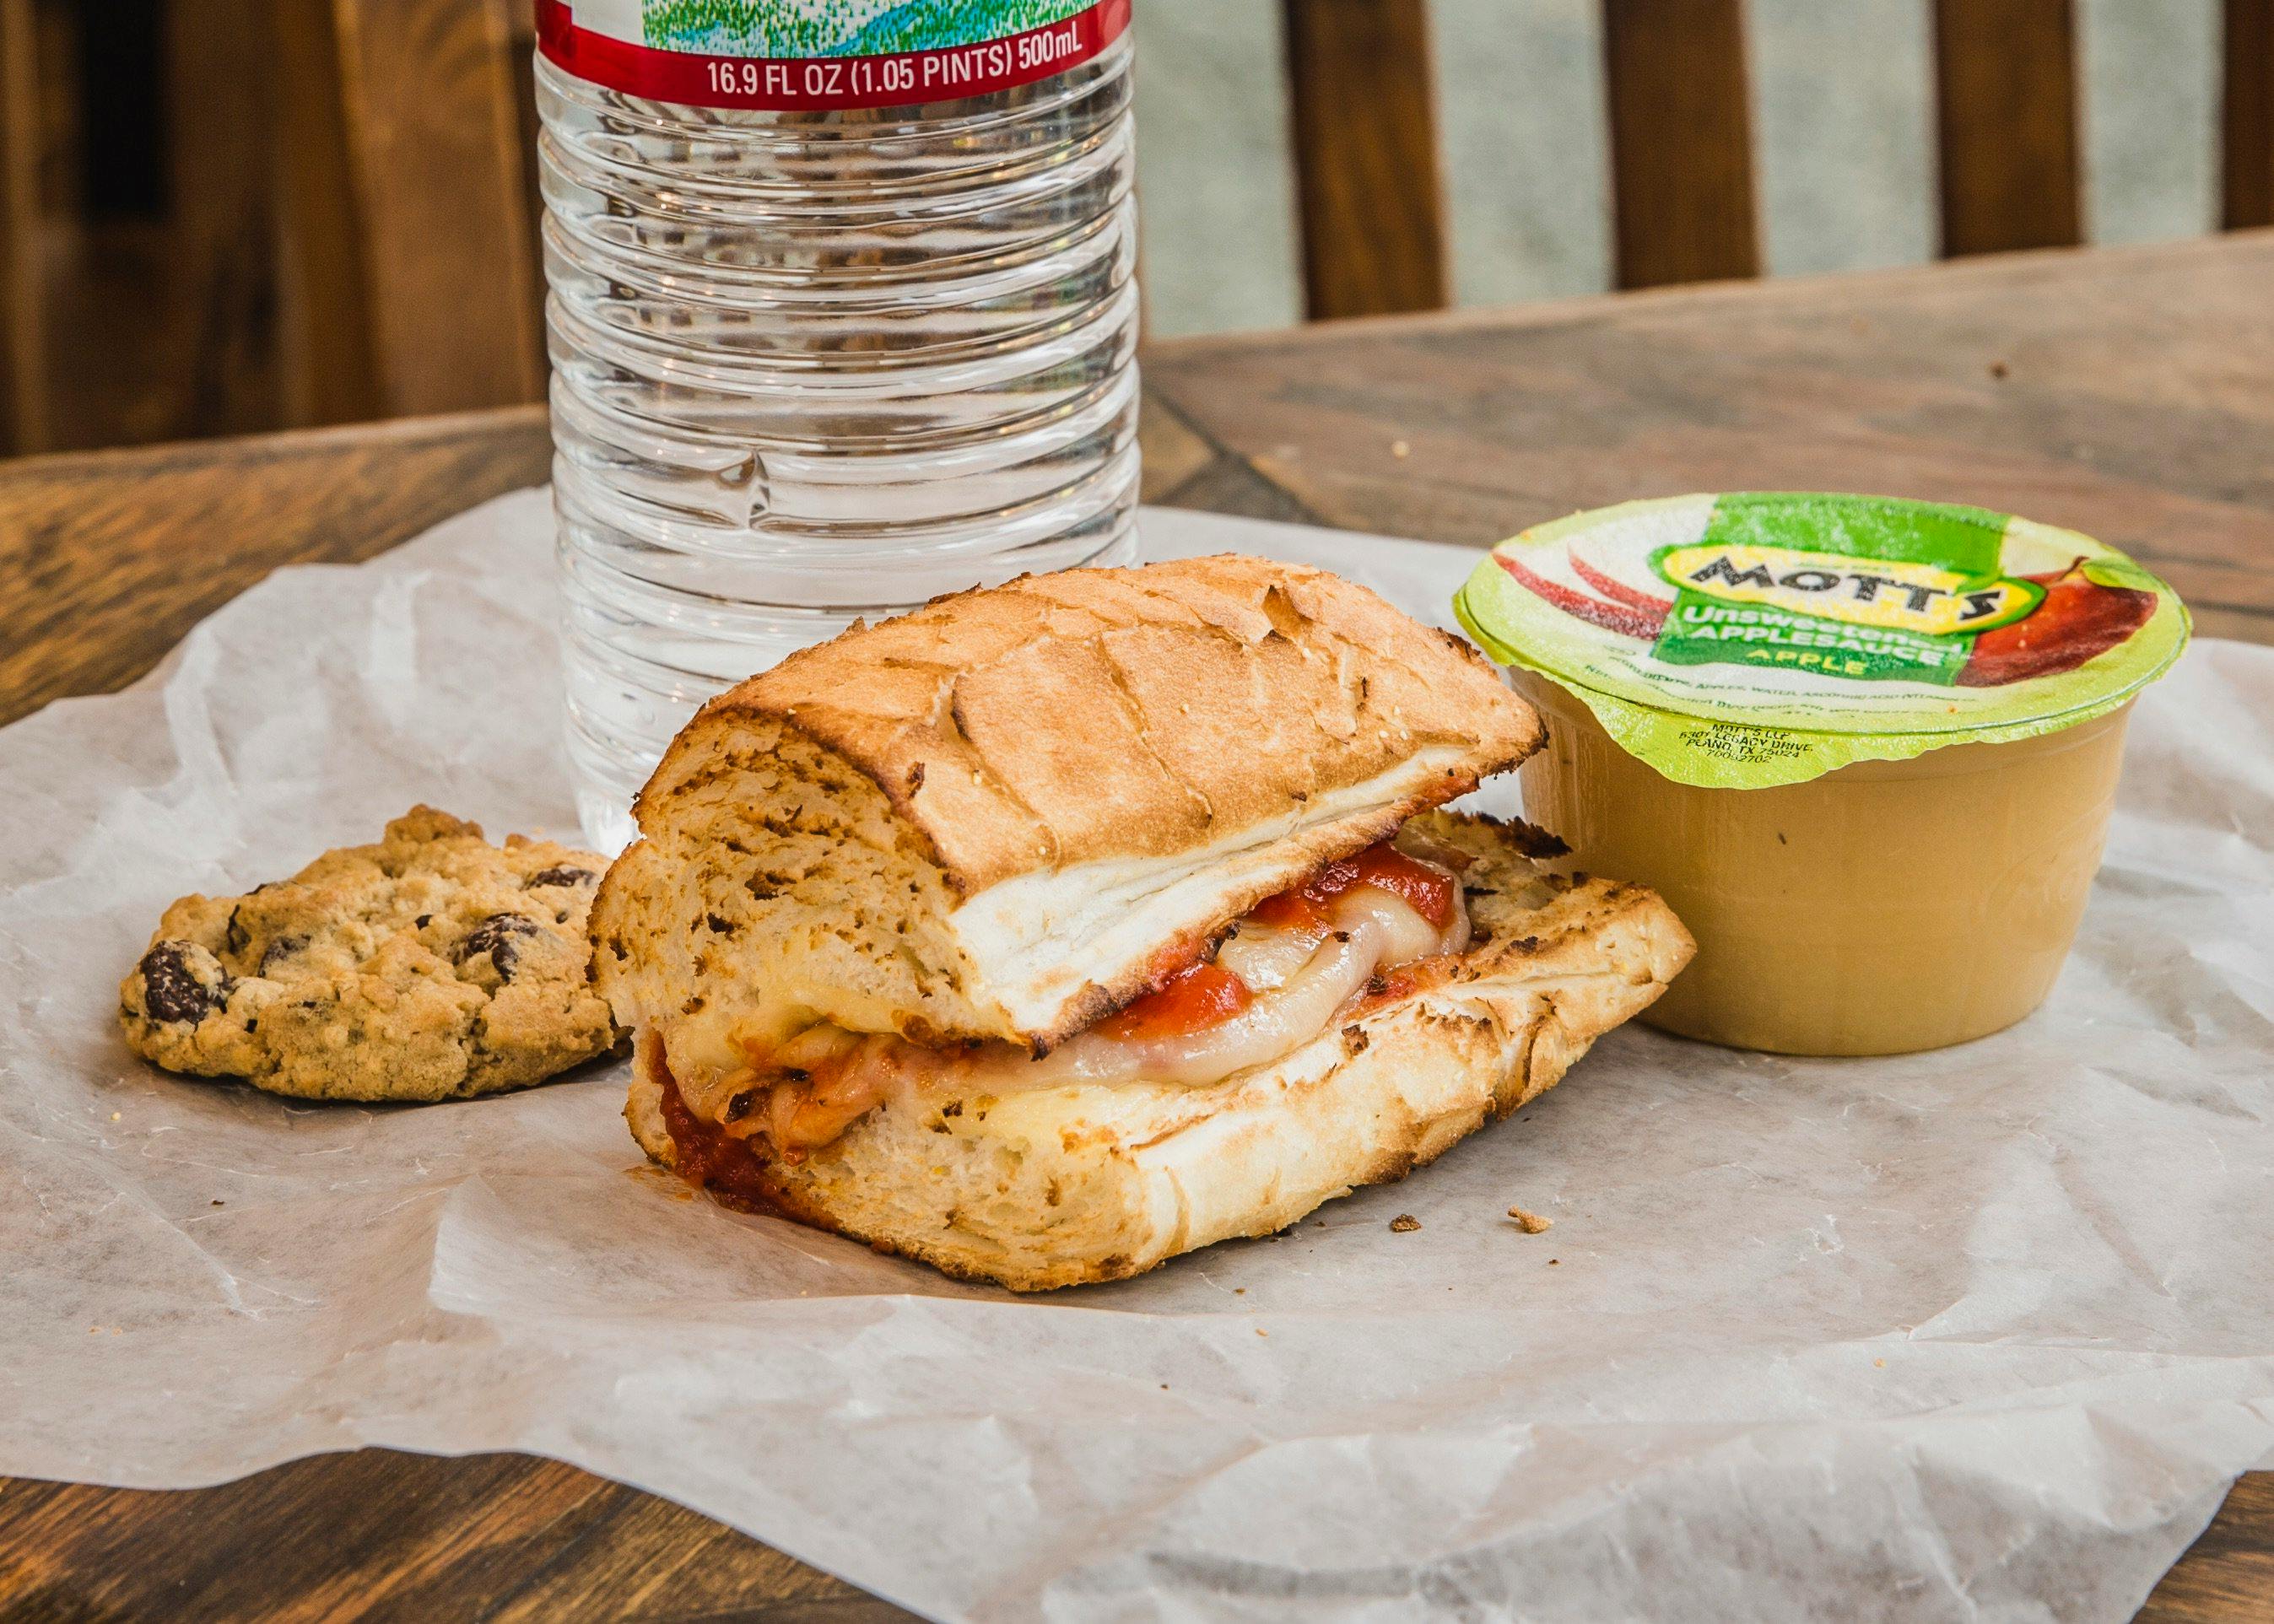 Potbelly kids meal with sandwich, cookie, side and bottle of water